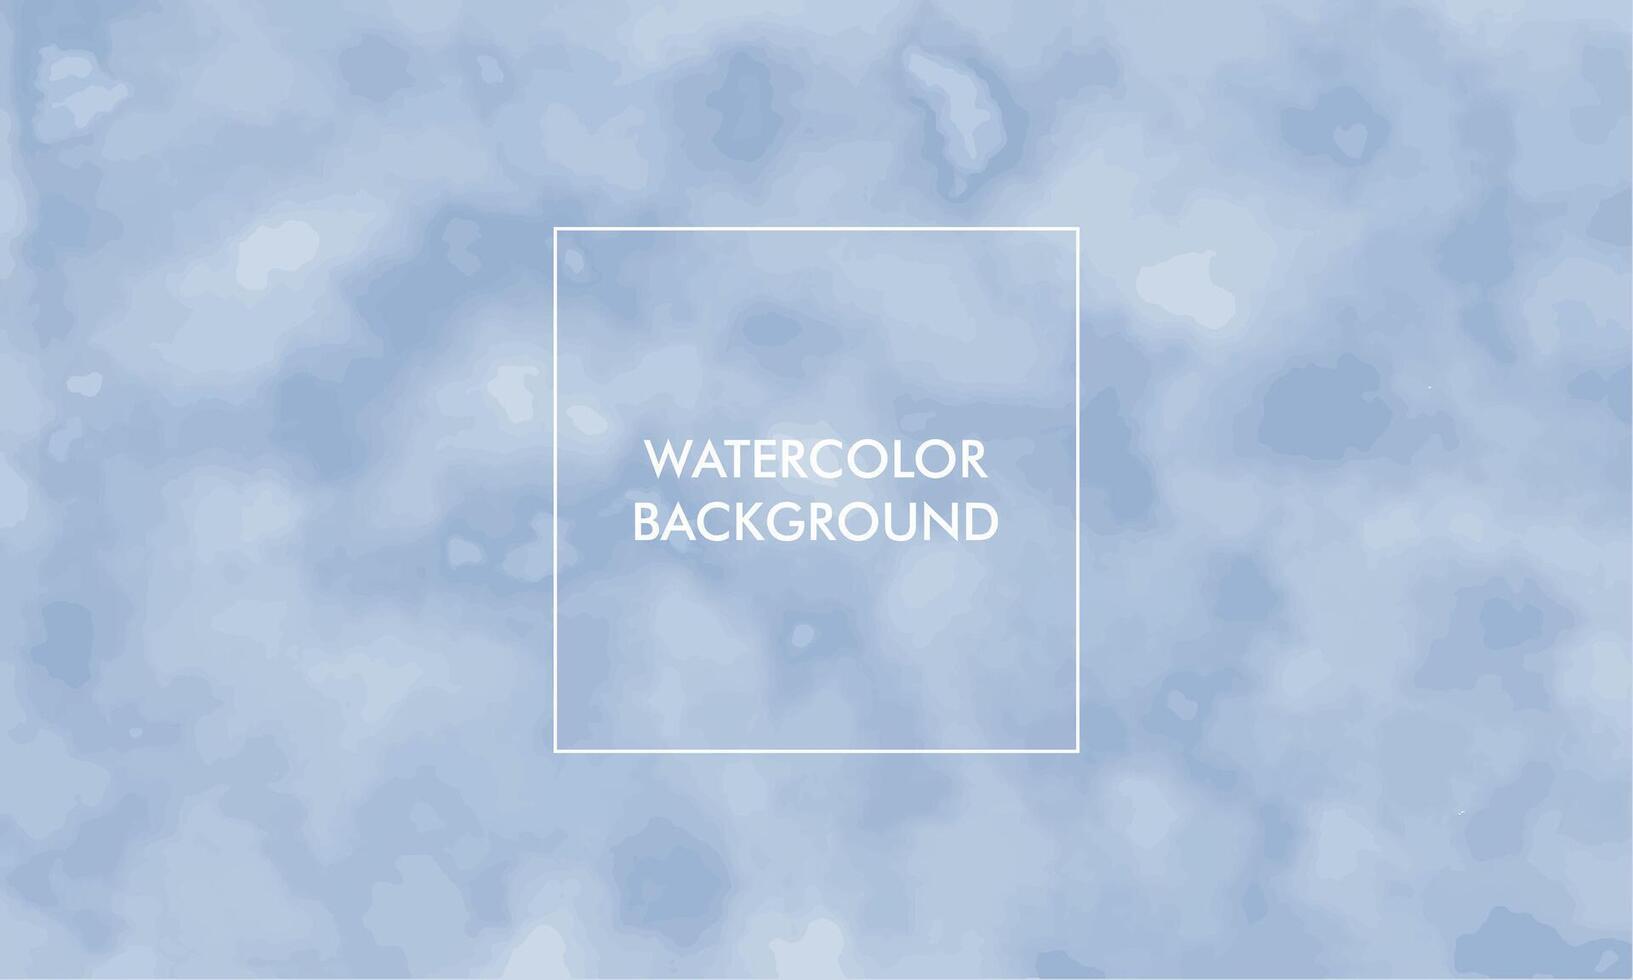 Watercolor Gradient mesh abstract blur texture background with colorful color vector